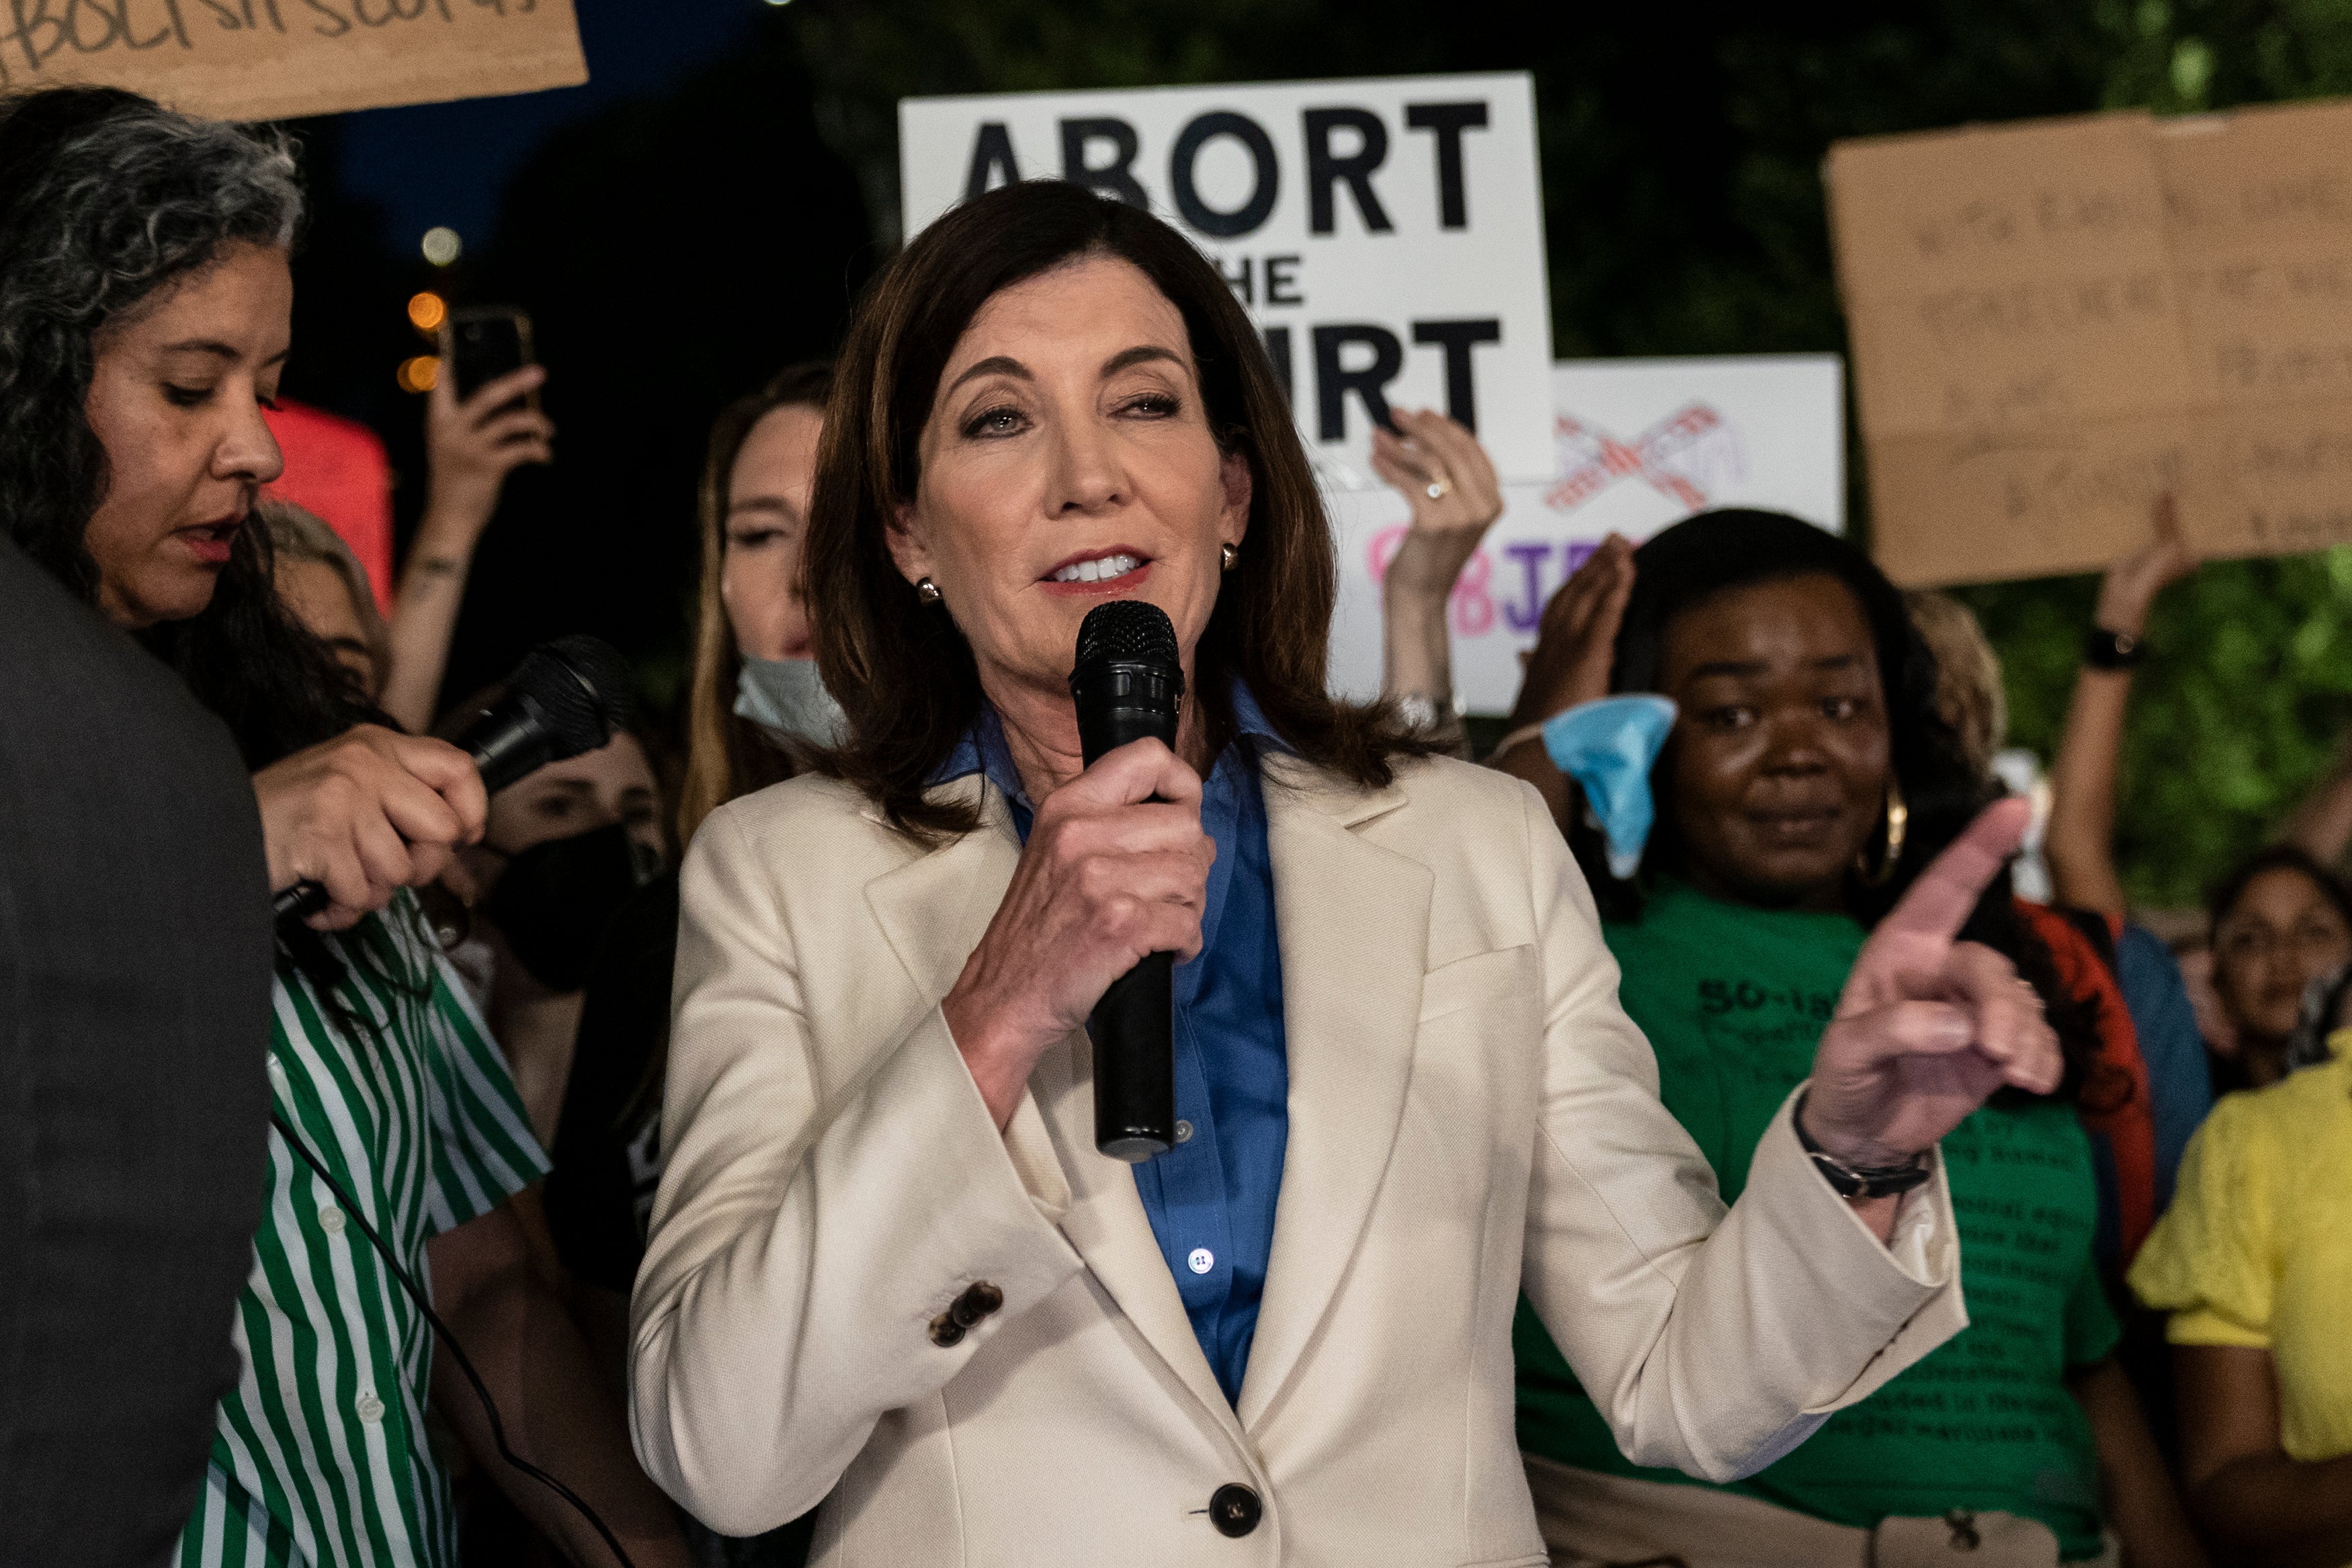 A woman stands in front of protesters who are are holding signs that read "Abort the Court."